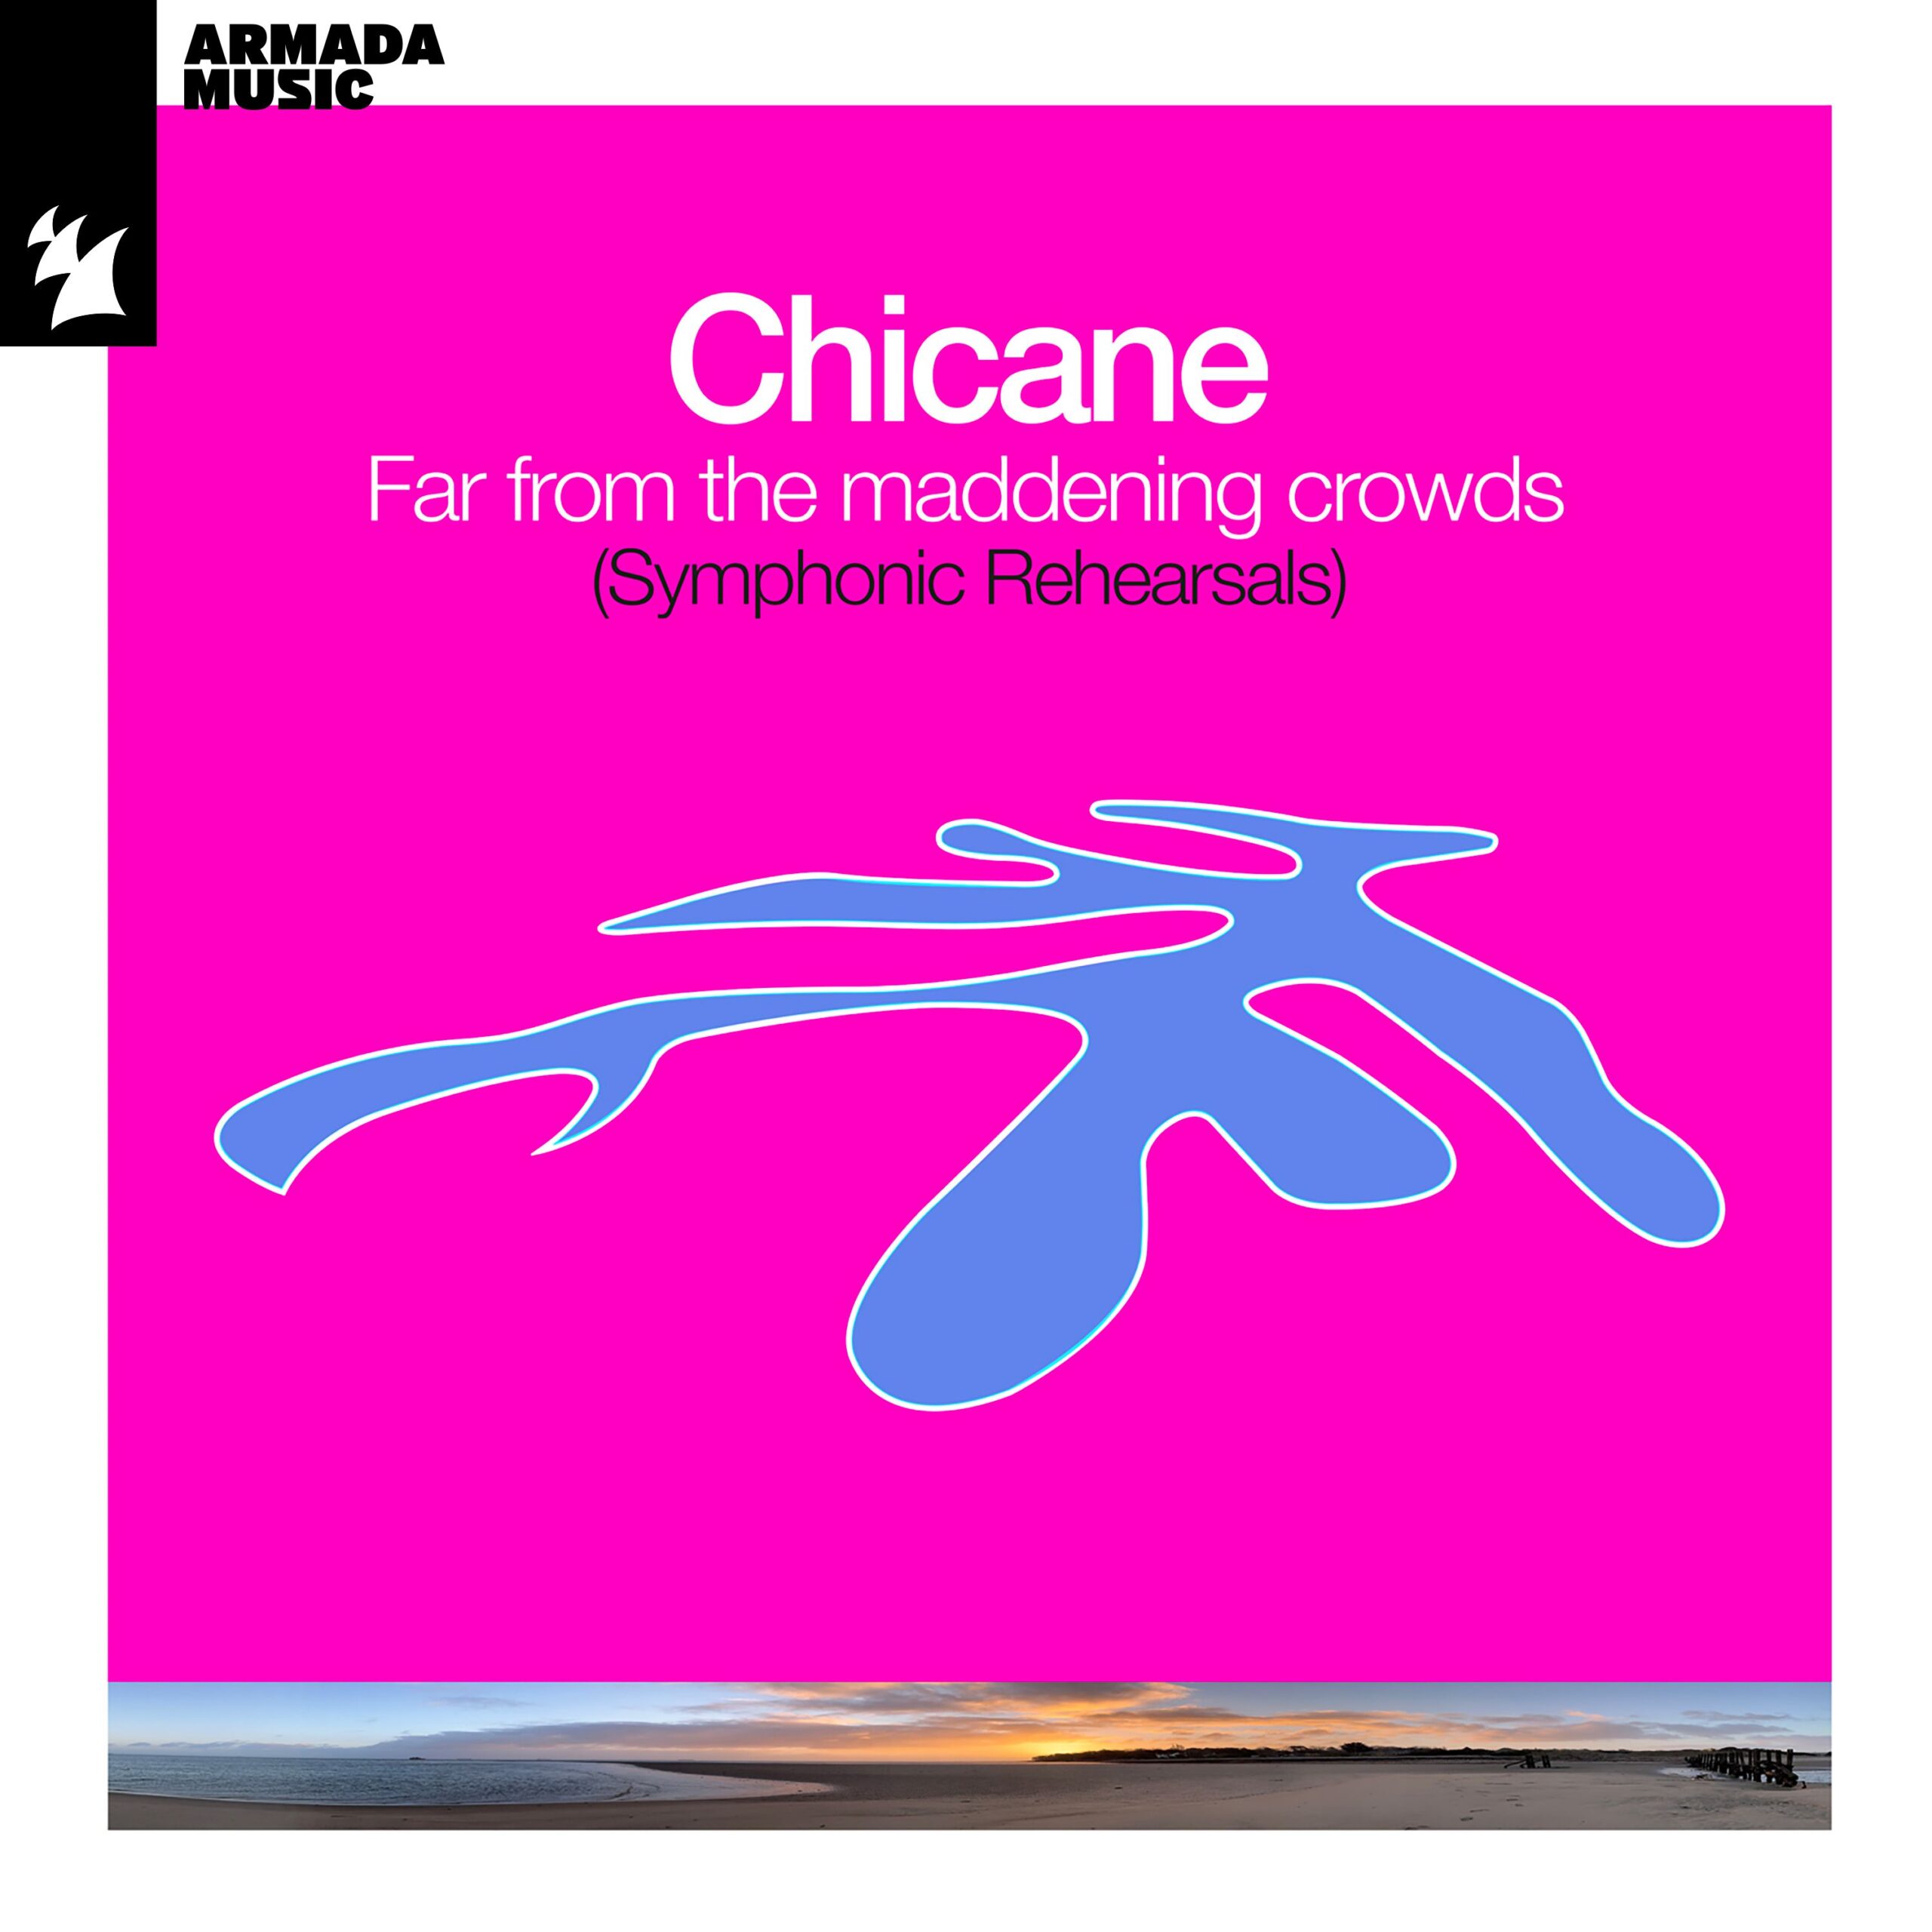 Chicane presents Far From the Maddening Crowds (Symphony Rehearsals) on Armada Music